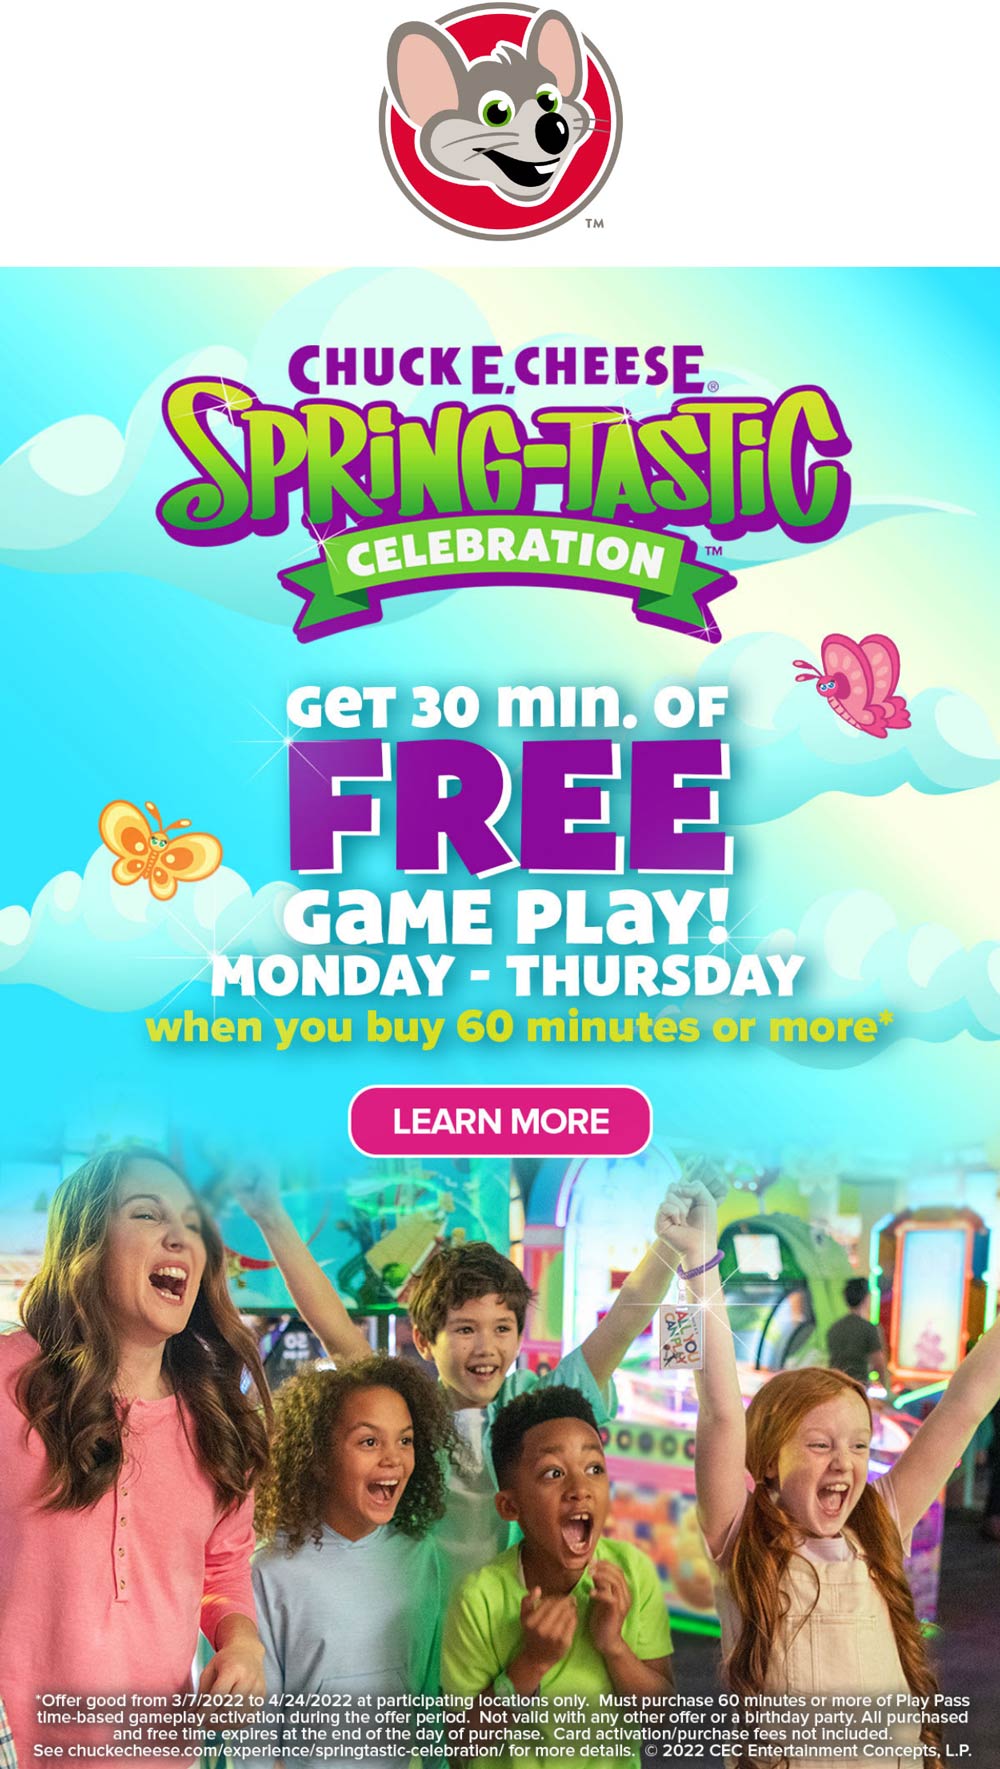 Chuck E. Cheese restaurants Coupon  Extra 30min game play free with 60min at Chuck E. Cheese pizza #chuckecheese 